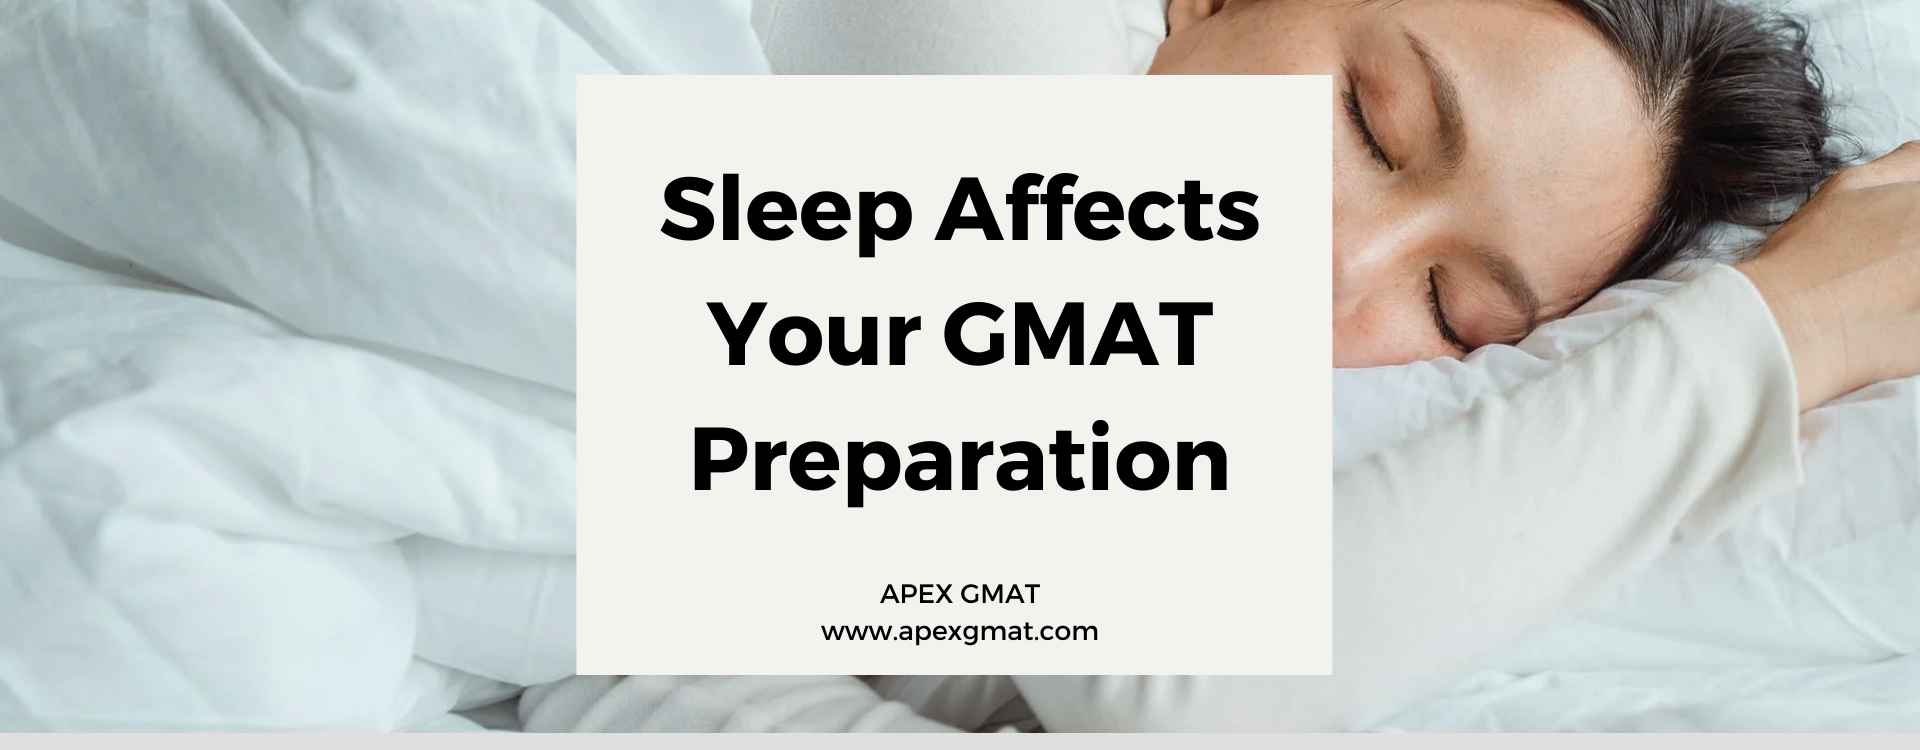 Sleep Affects Your GMAT Preparation